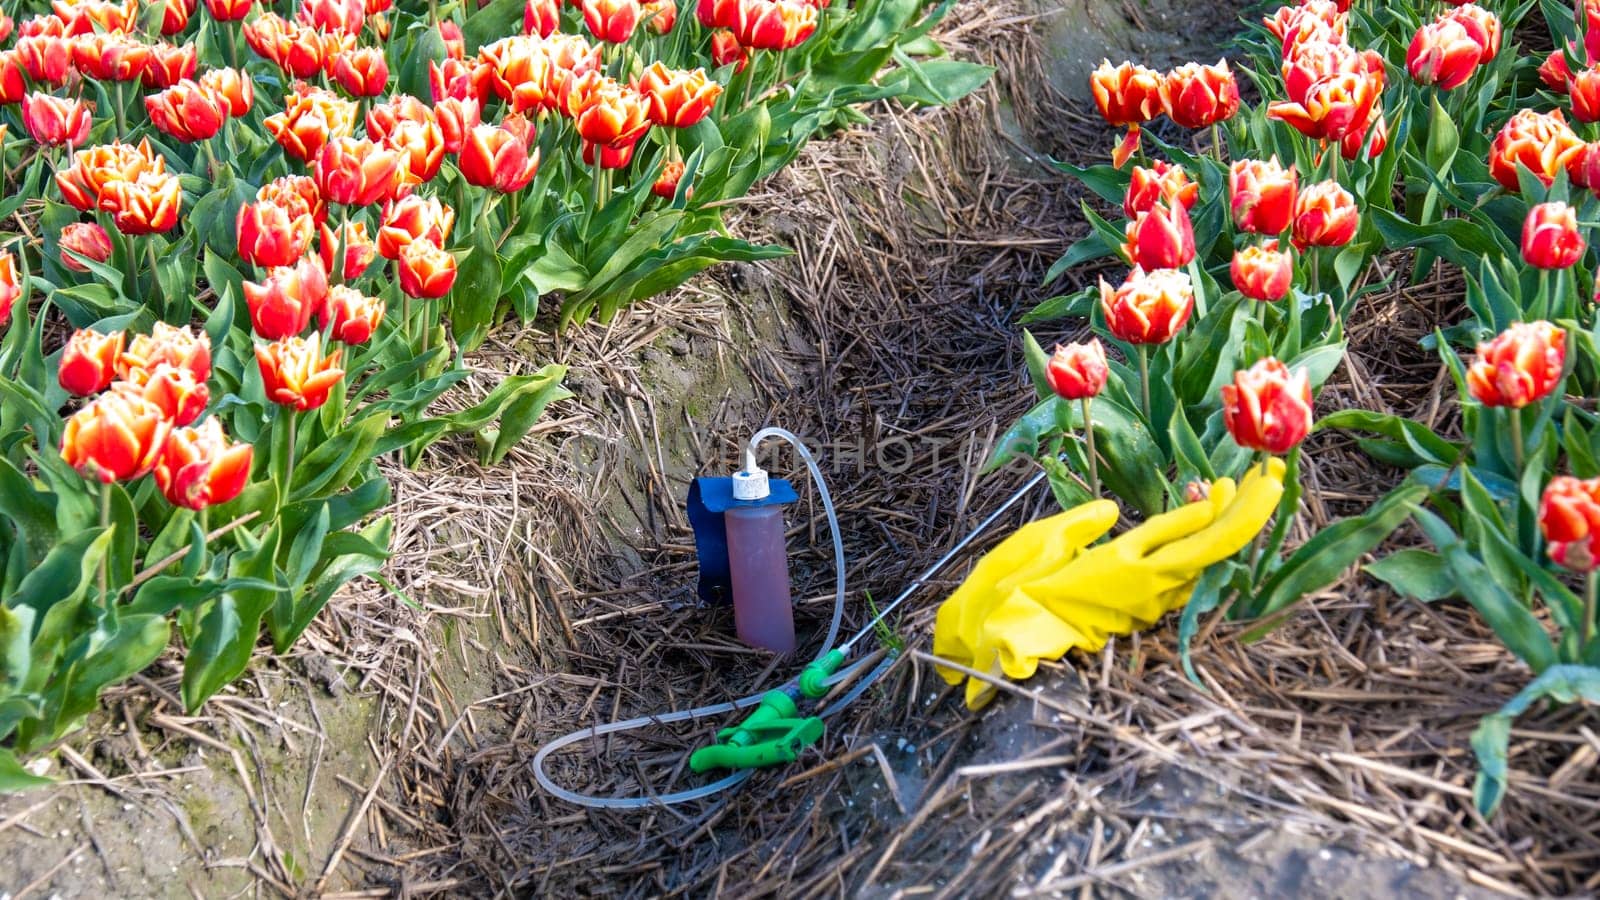 sprayer with pesticides and gloves on the ground with a colorful tulip field in the Netherlands by fokkebok